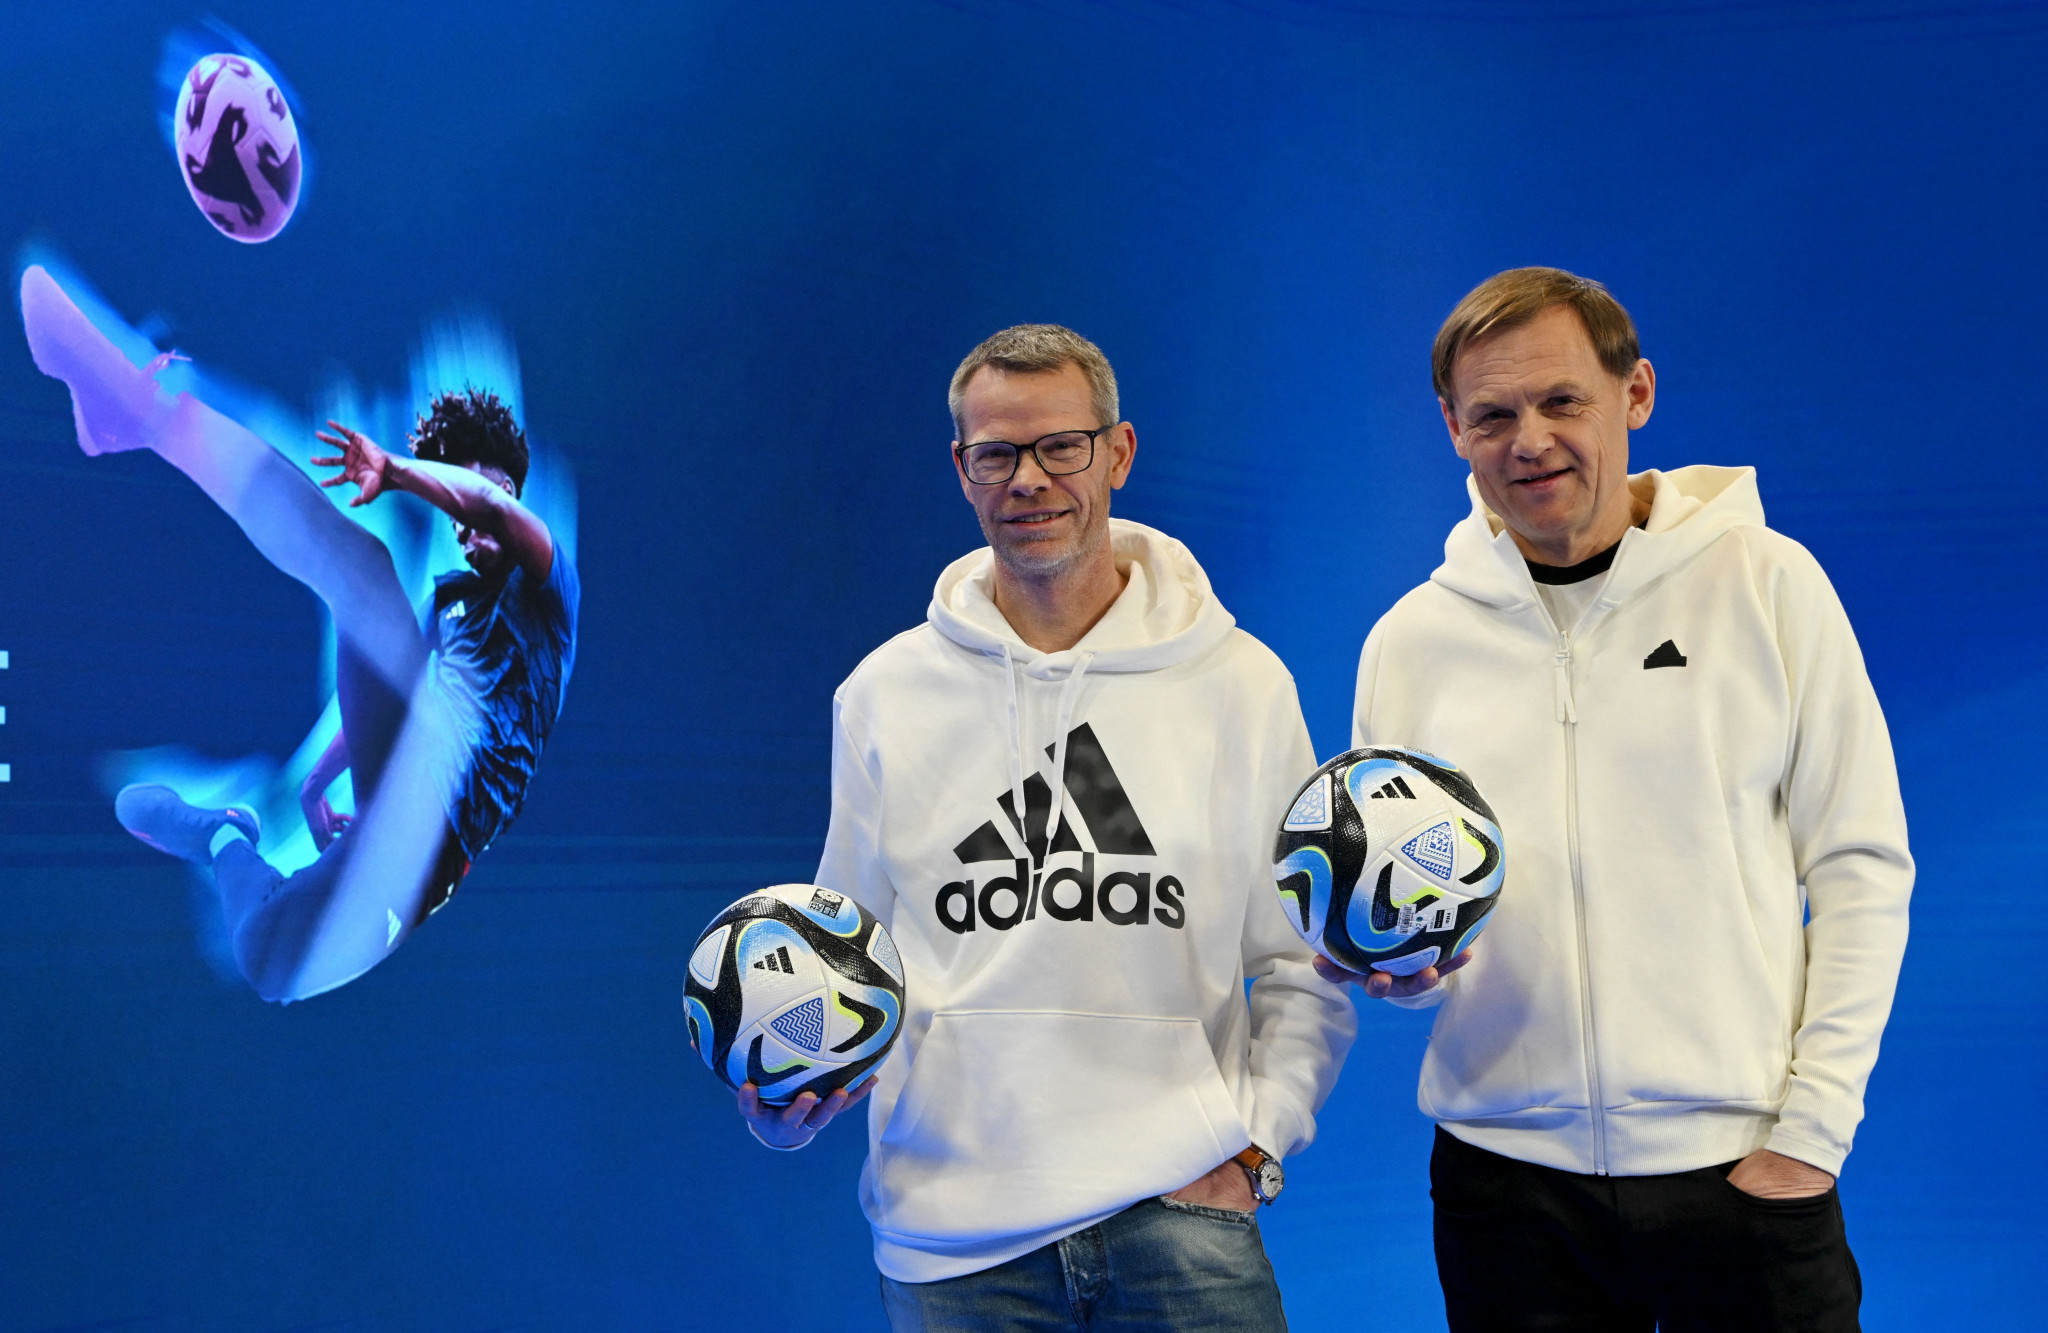 Adidas' chief financial officer Harm Ohlmeyer, left, and chief executive Bjørn Gulden, right, have spoken about the company's financial state ©Getty Images